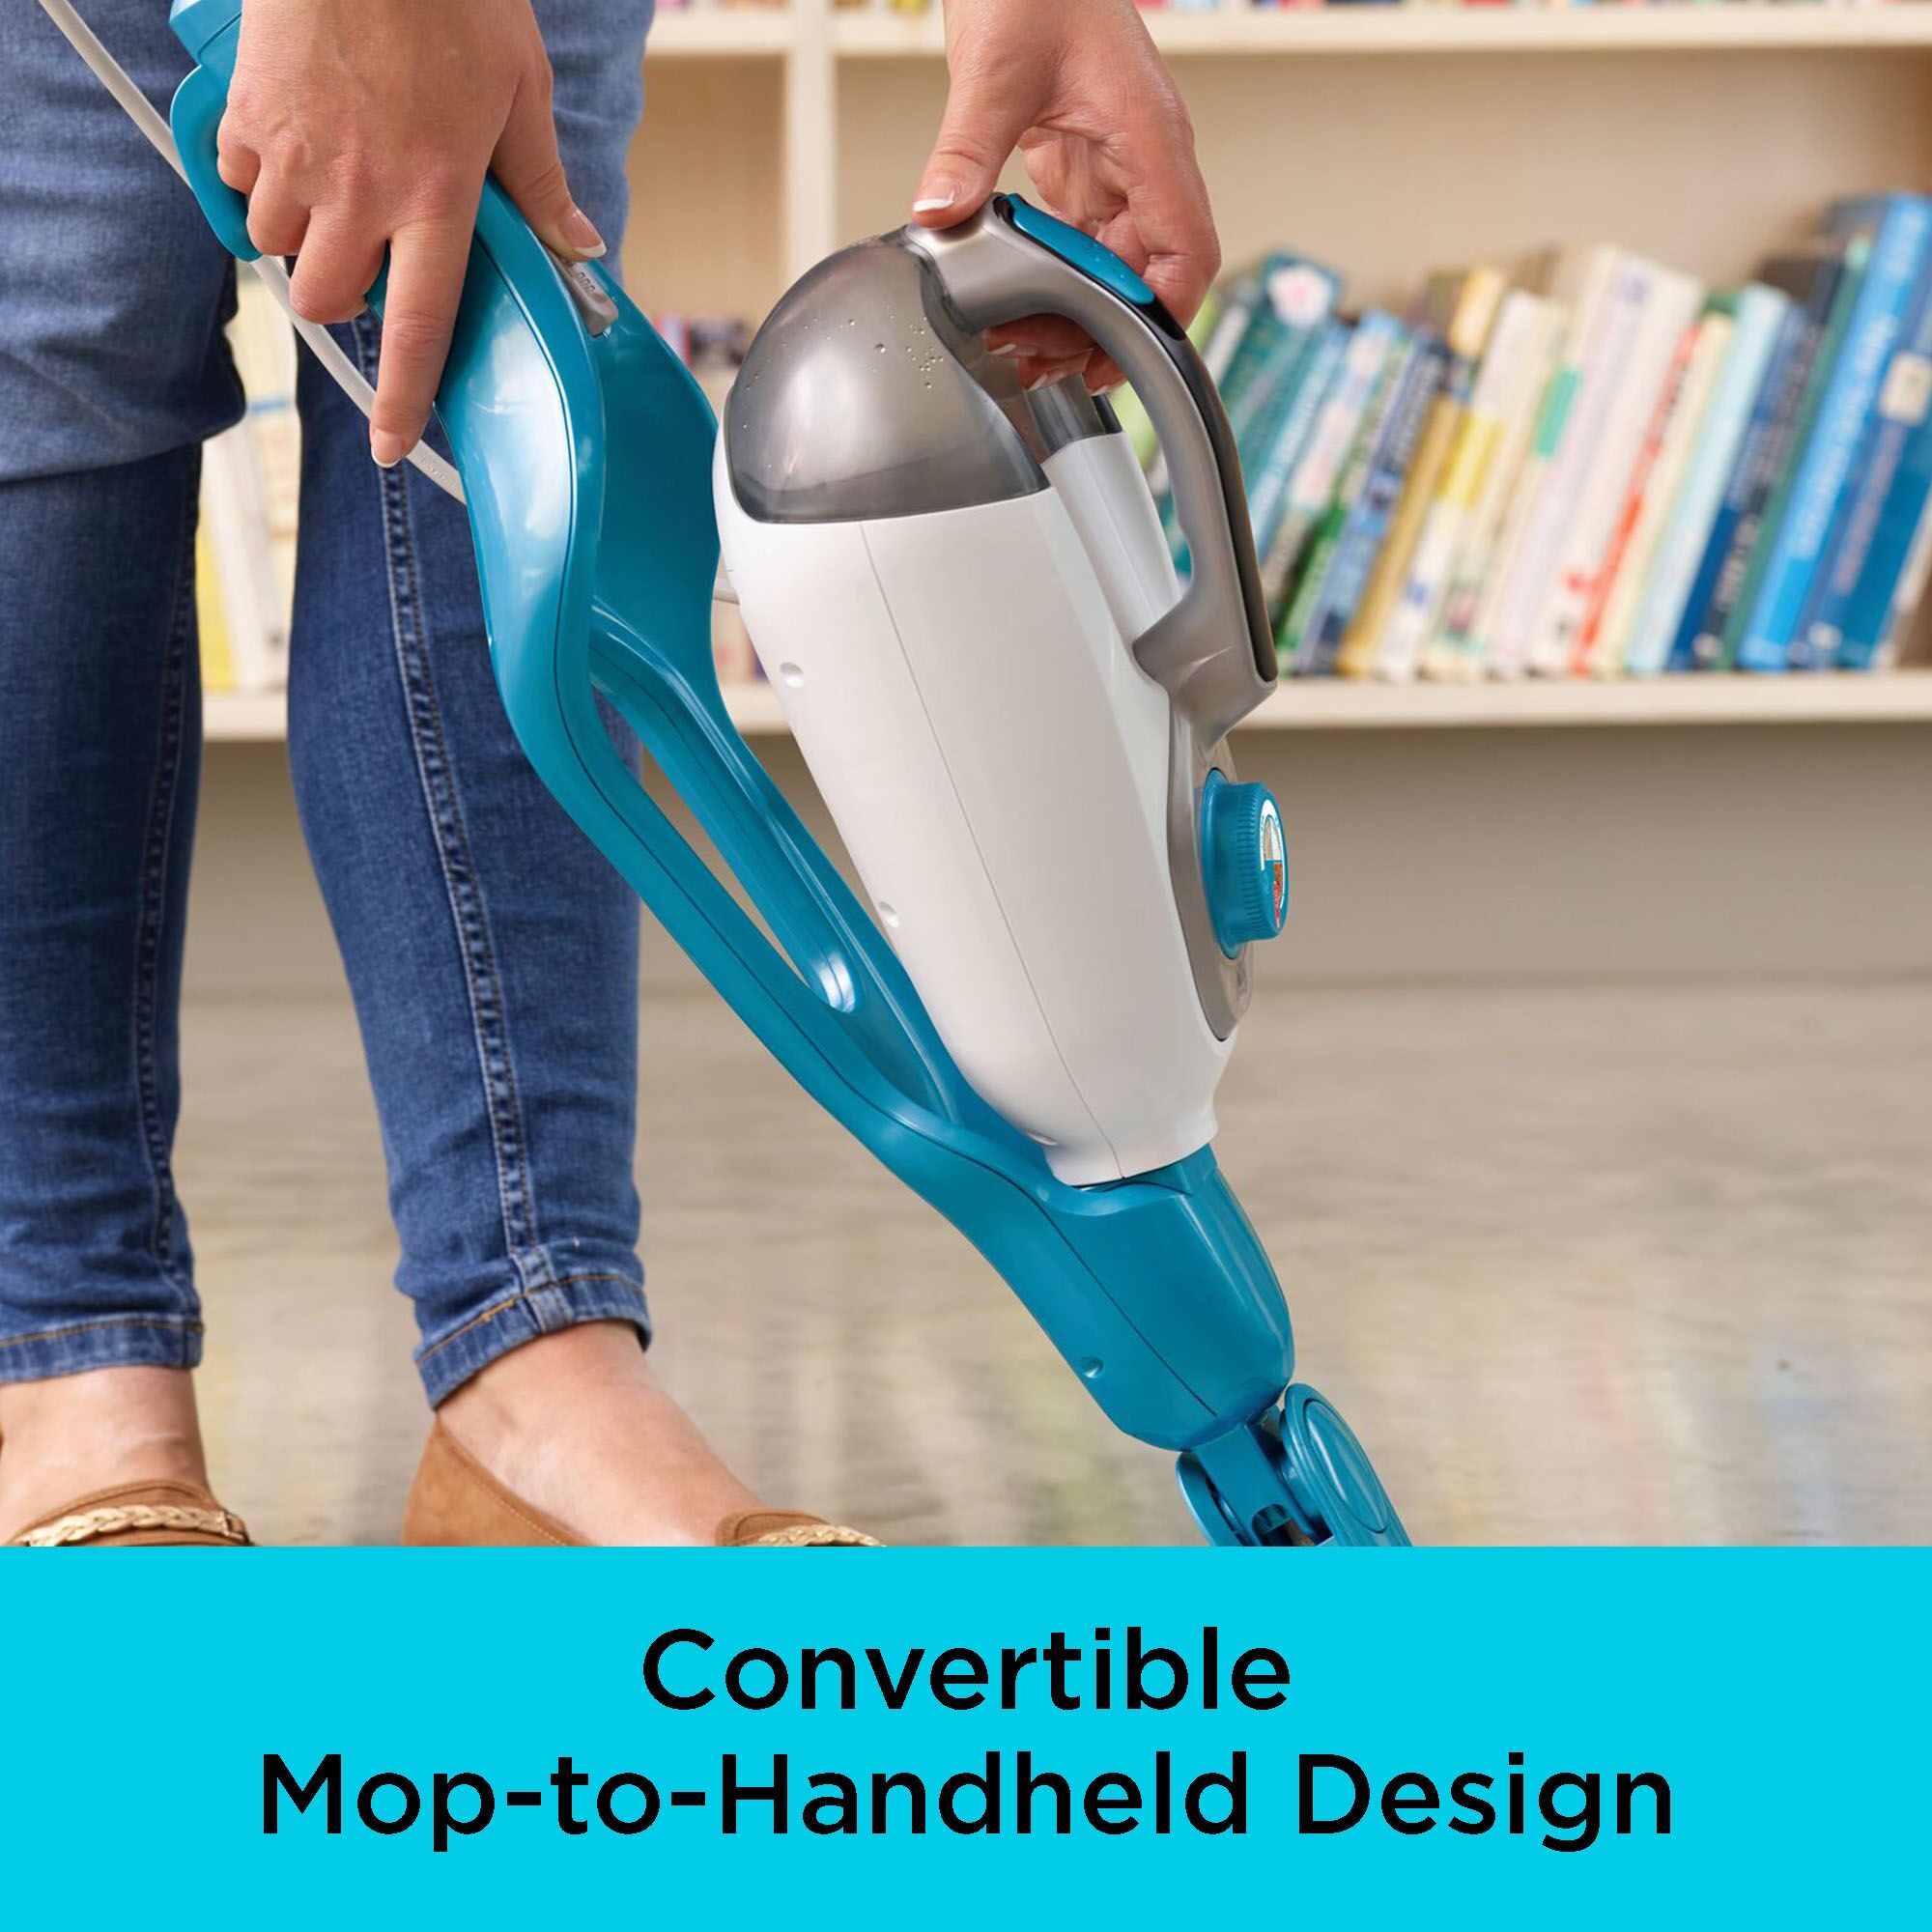 A closeup of the handheld design featured on the BLACK+DECKER SteamMop™ 2-in-1 Corded Portable Steamer. Convertible mop-to-handheld design.